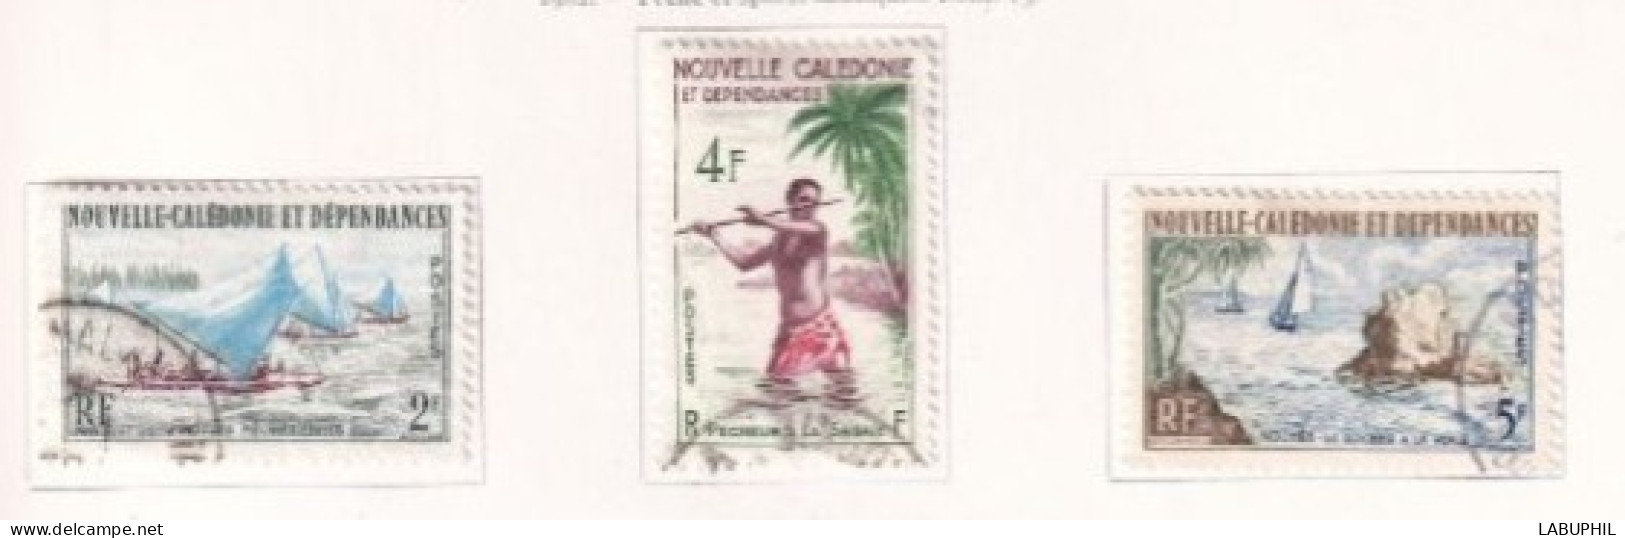 NOUVELLE CALEDONIE Dispersion D'une Collection Oblitéré Used  1962 PECHE - Used Stamps